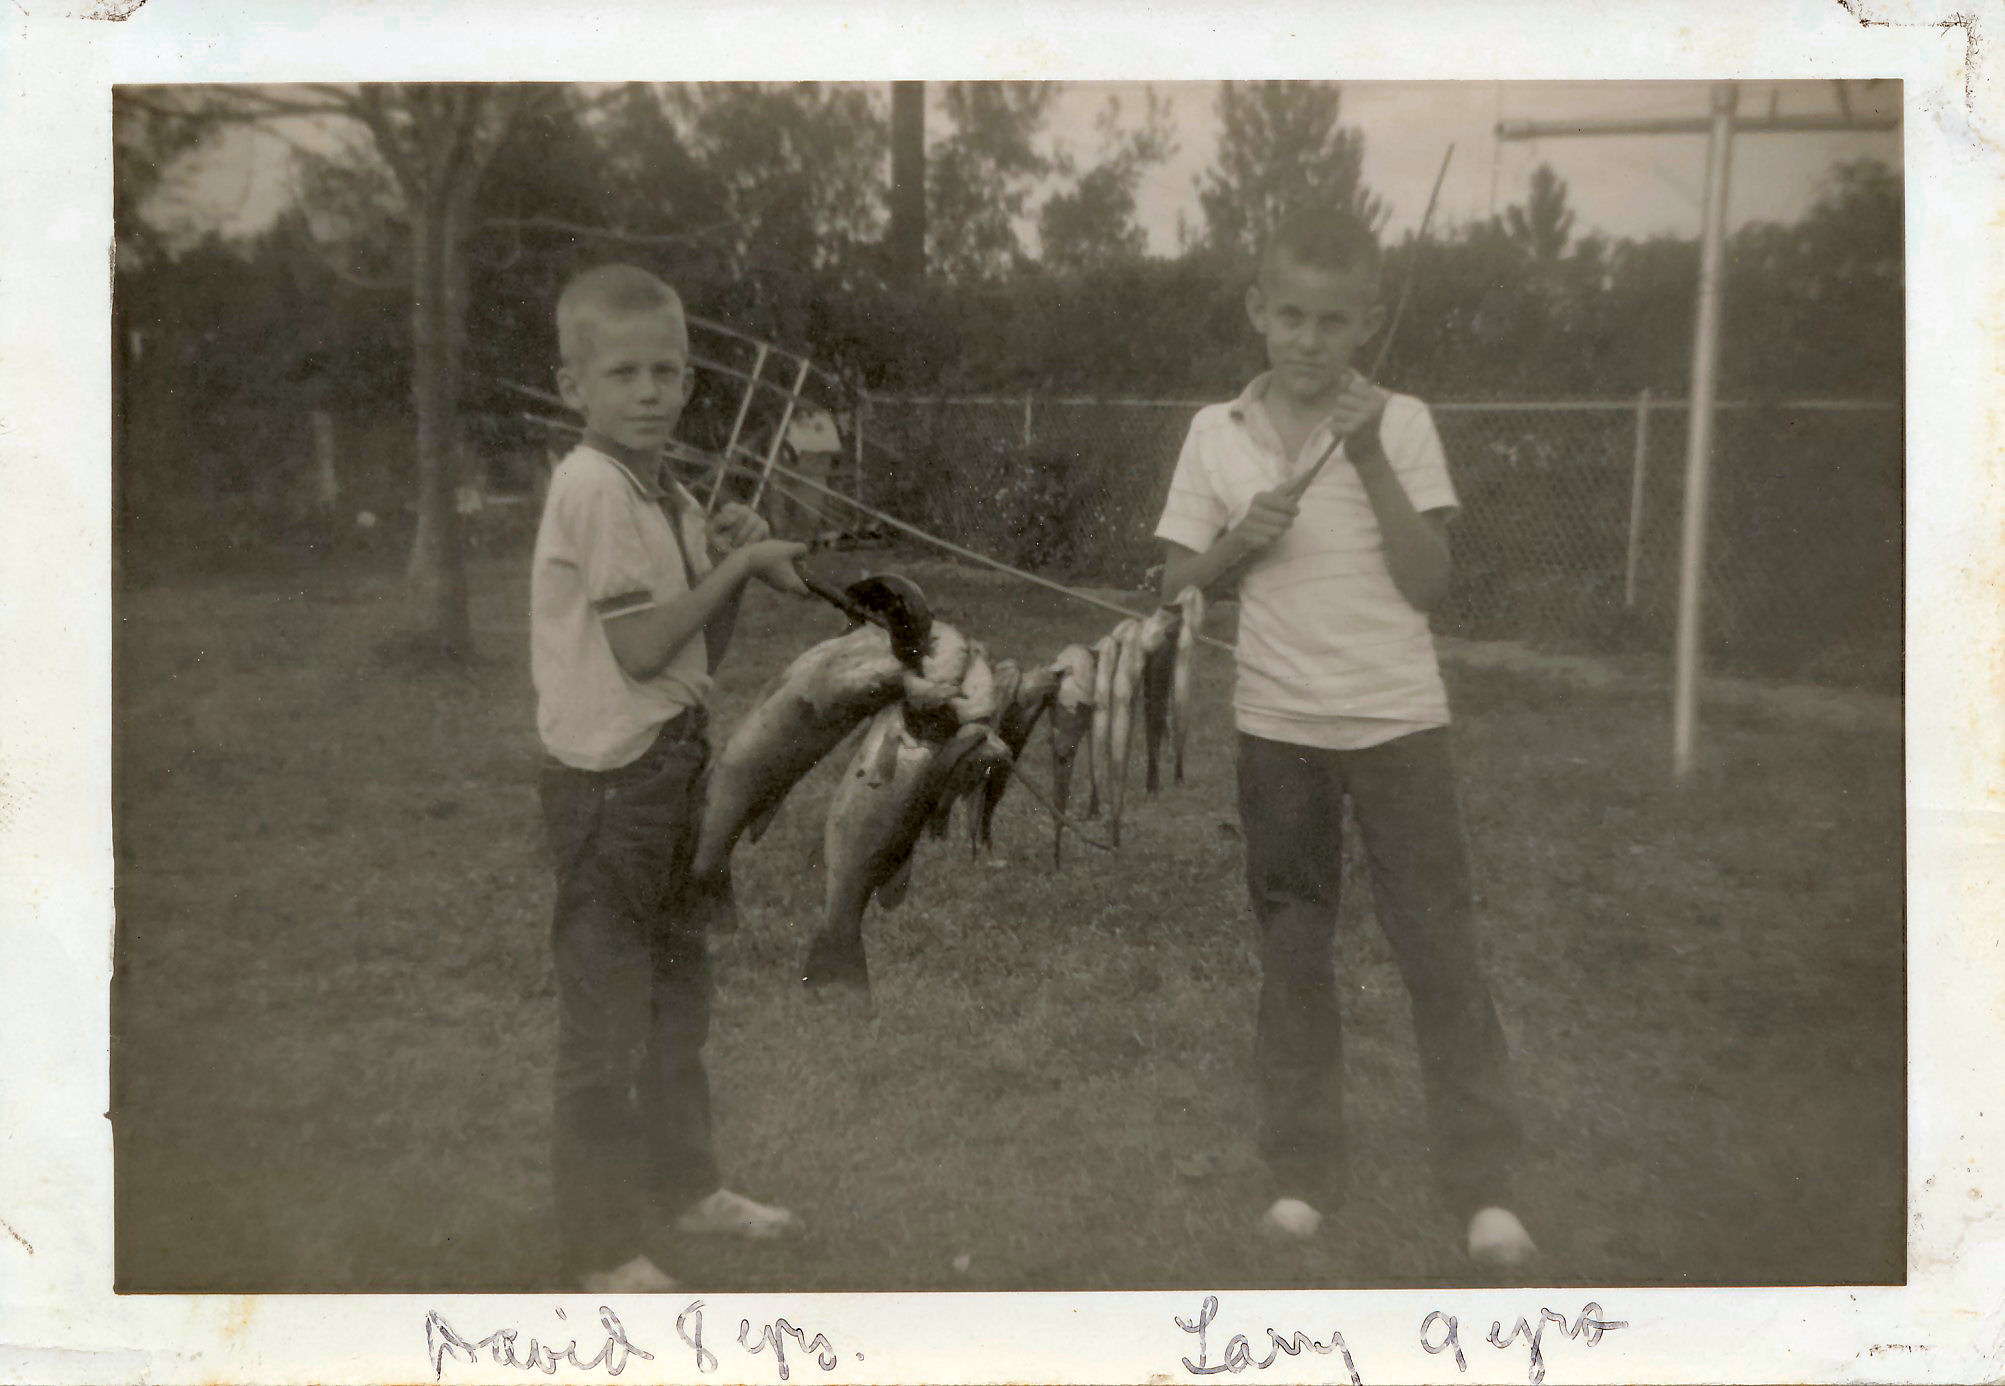 David and Larry with fish